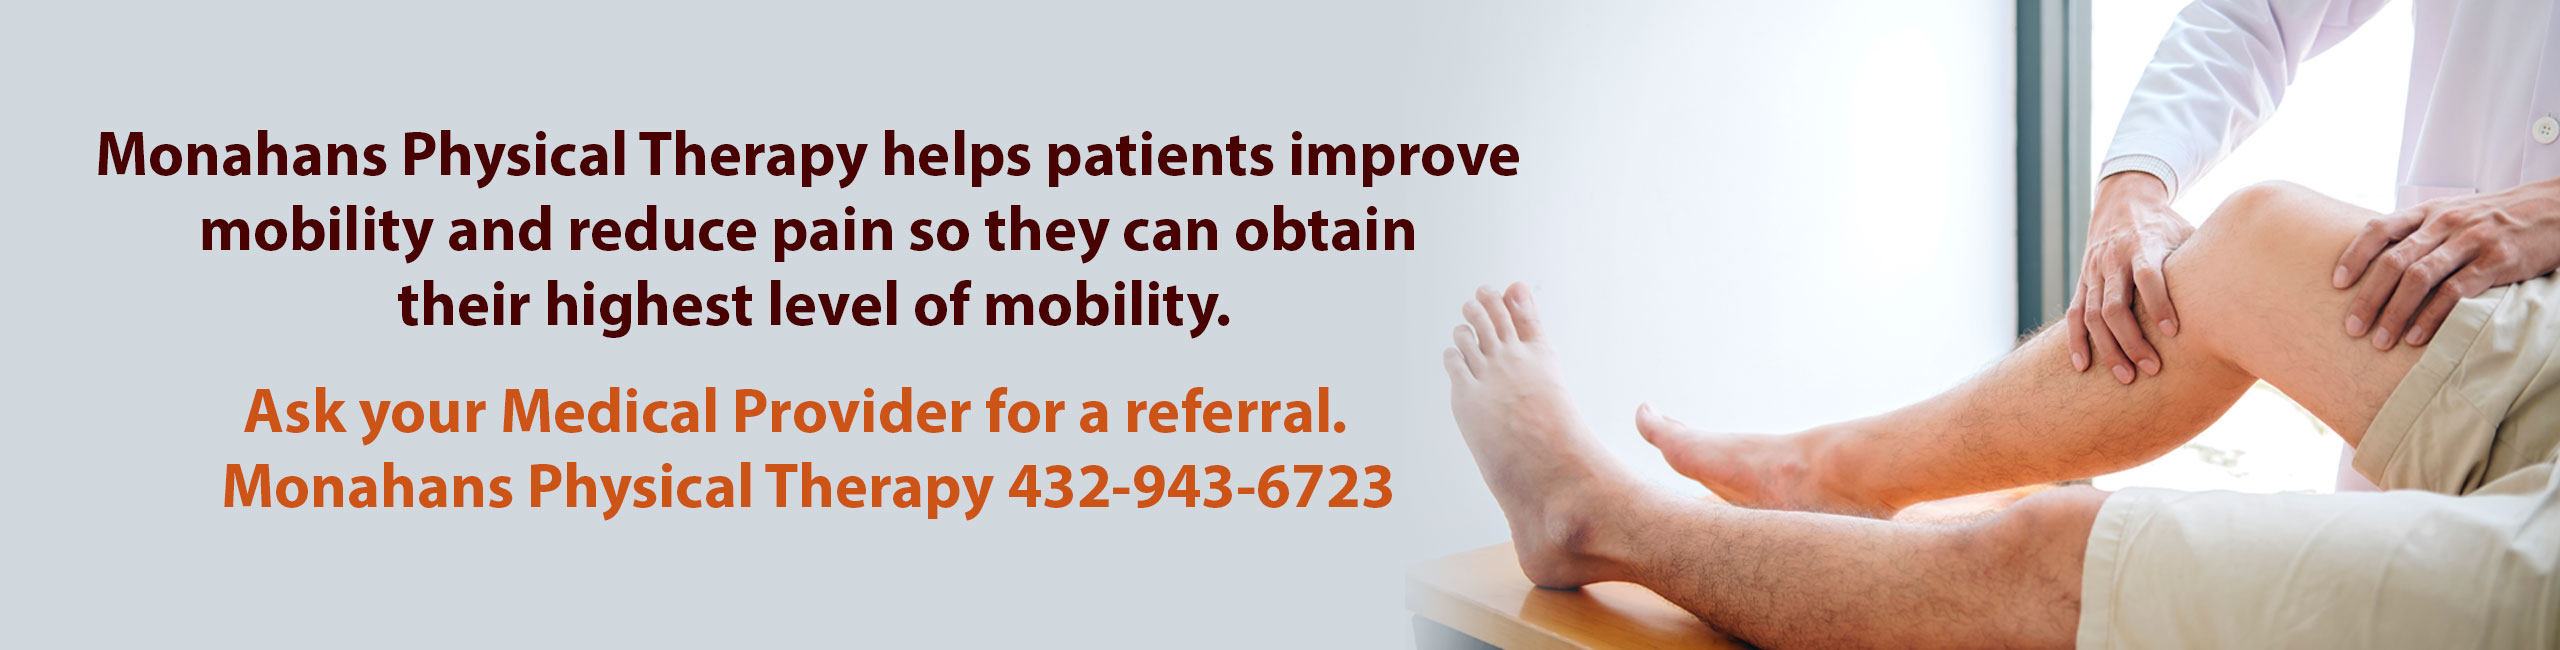 Monahans Physical Therapy helps patients improve mobility and reduce pain so they can obtain their highest level of mobility.
Ask your Medical Provider for a referral.
Monahans Physical Therapy 432-943-6723